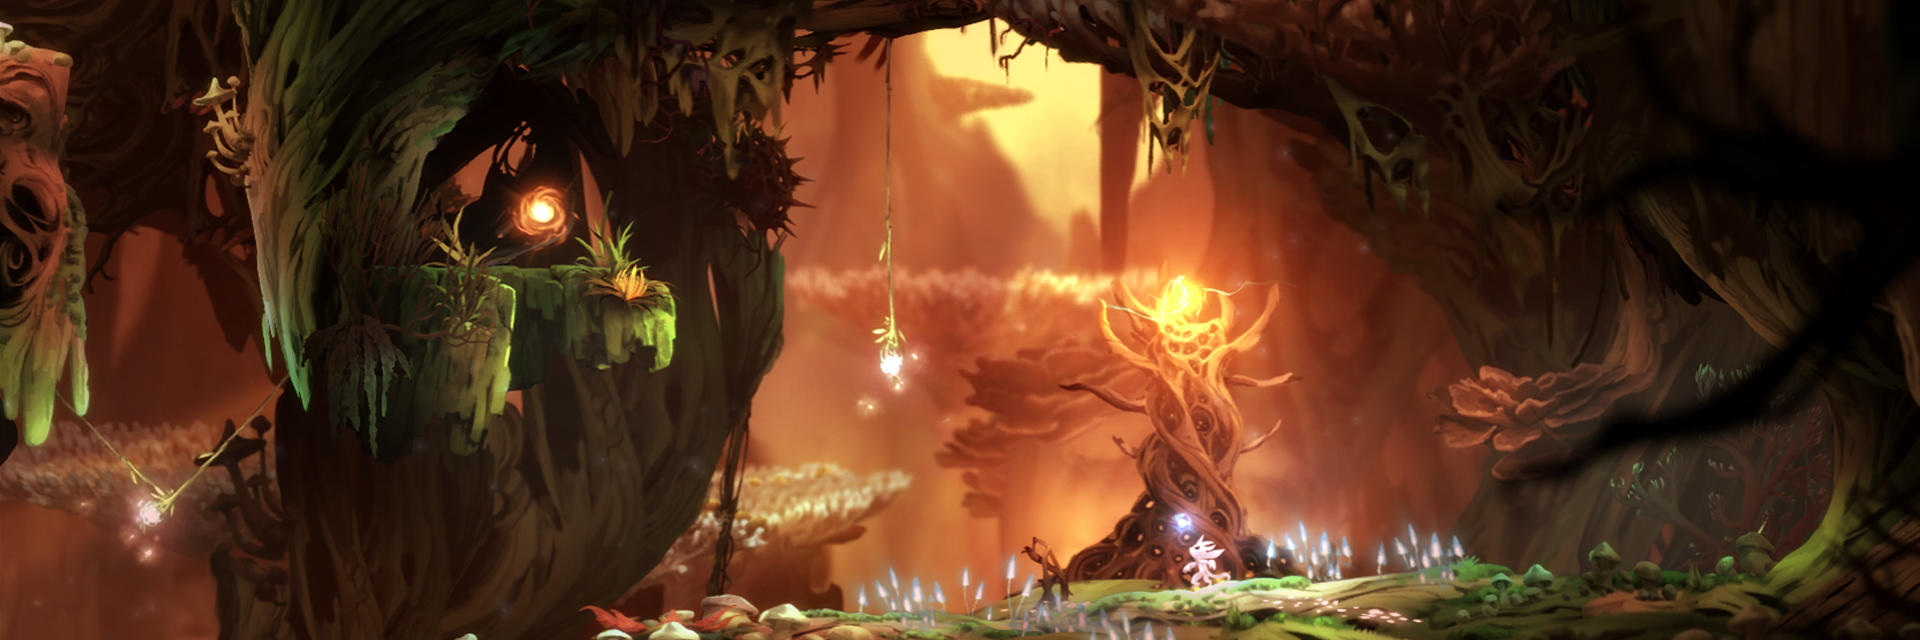 Ori and the Blind Forest from Moon Studios